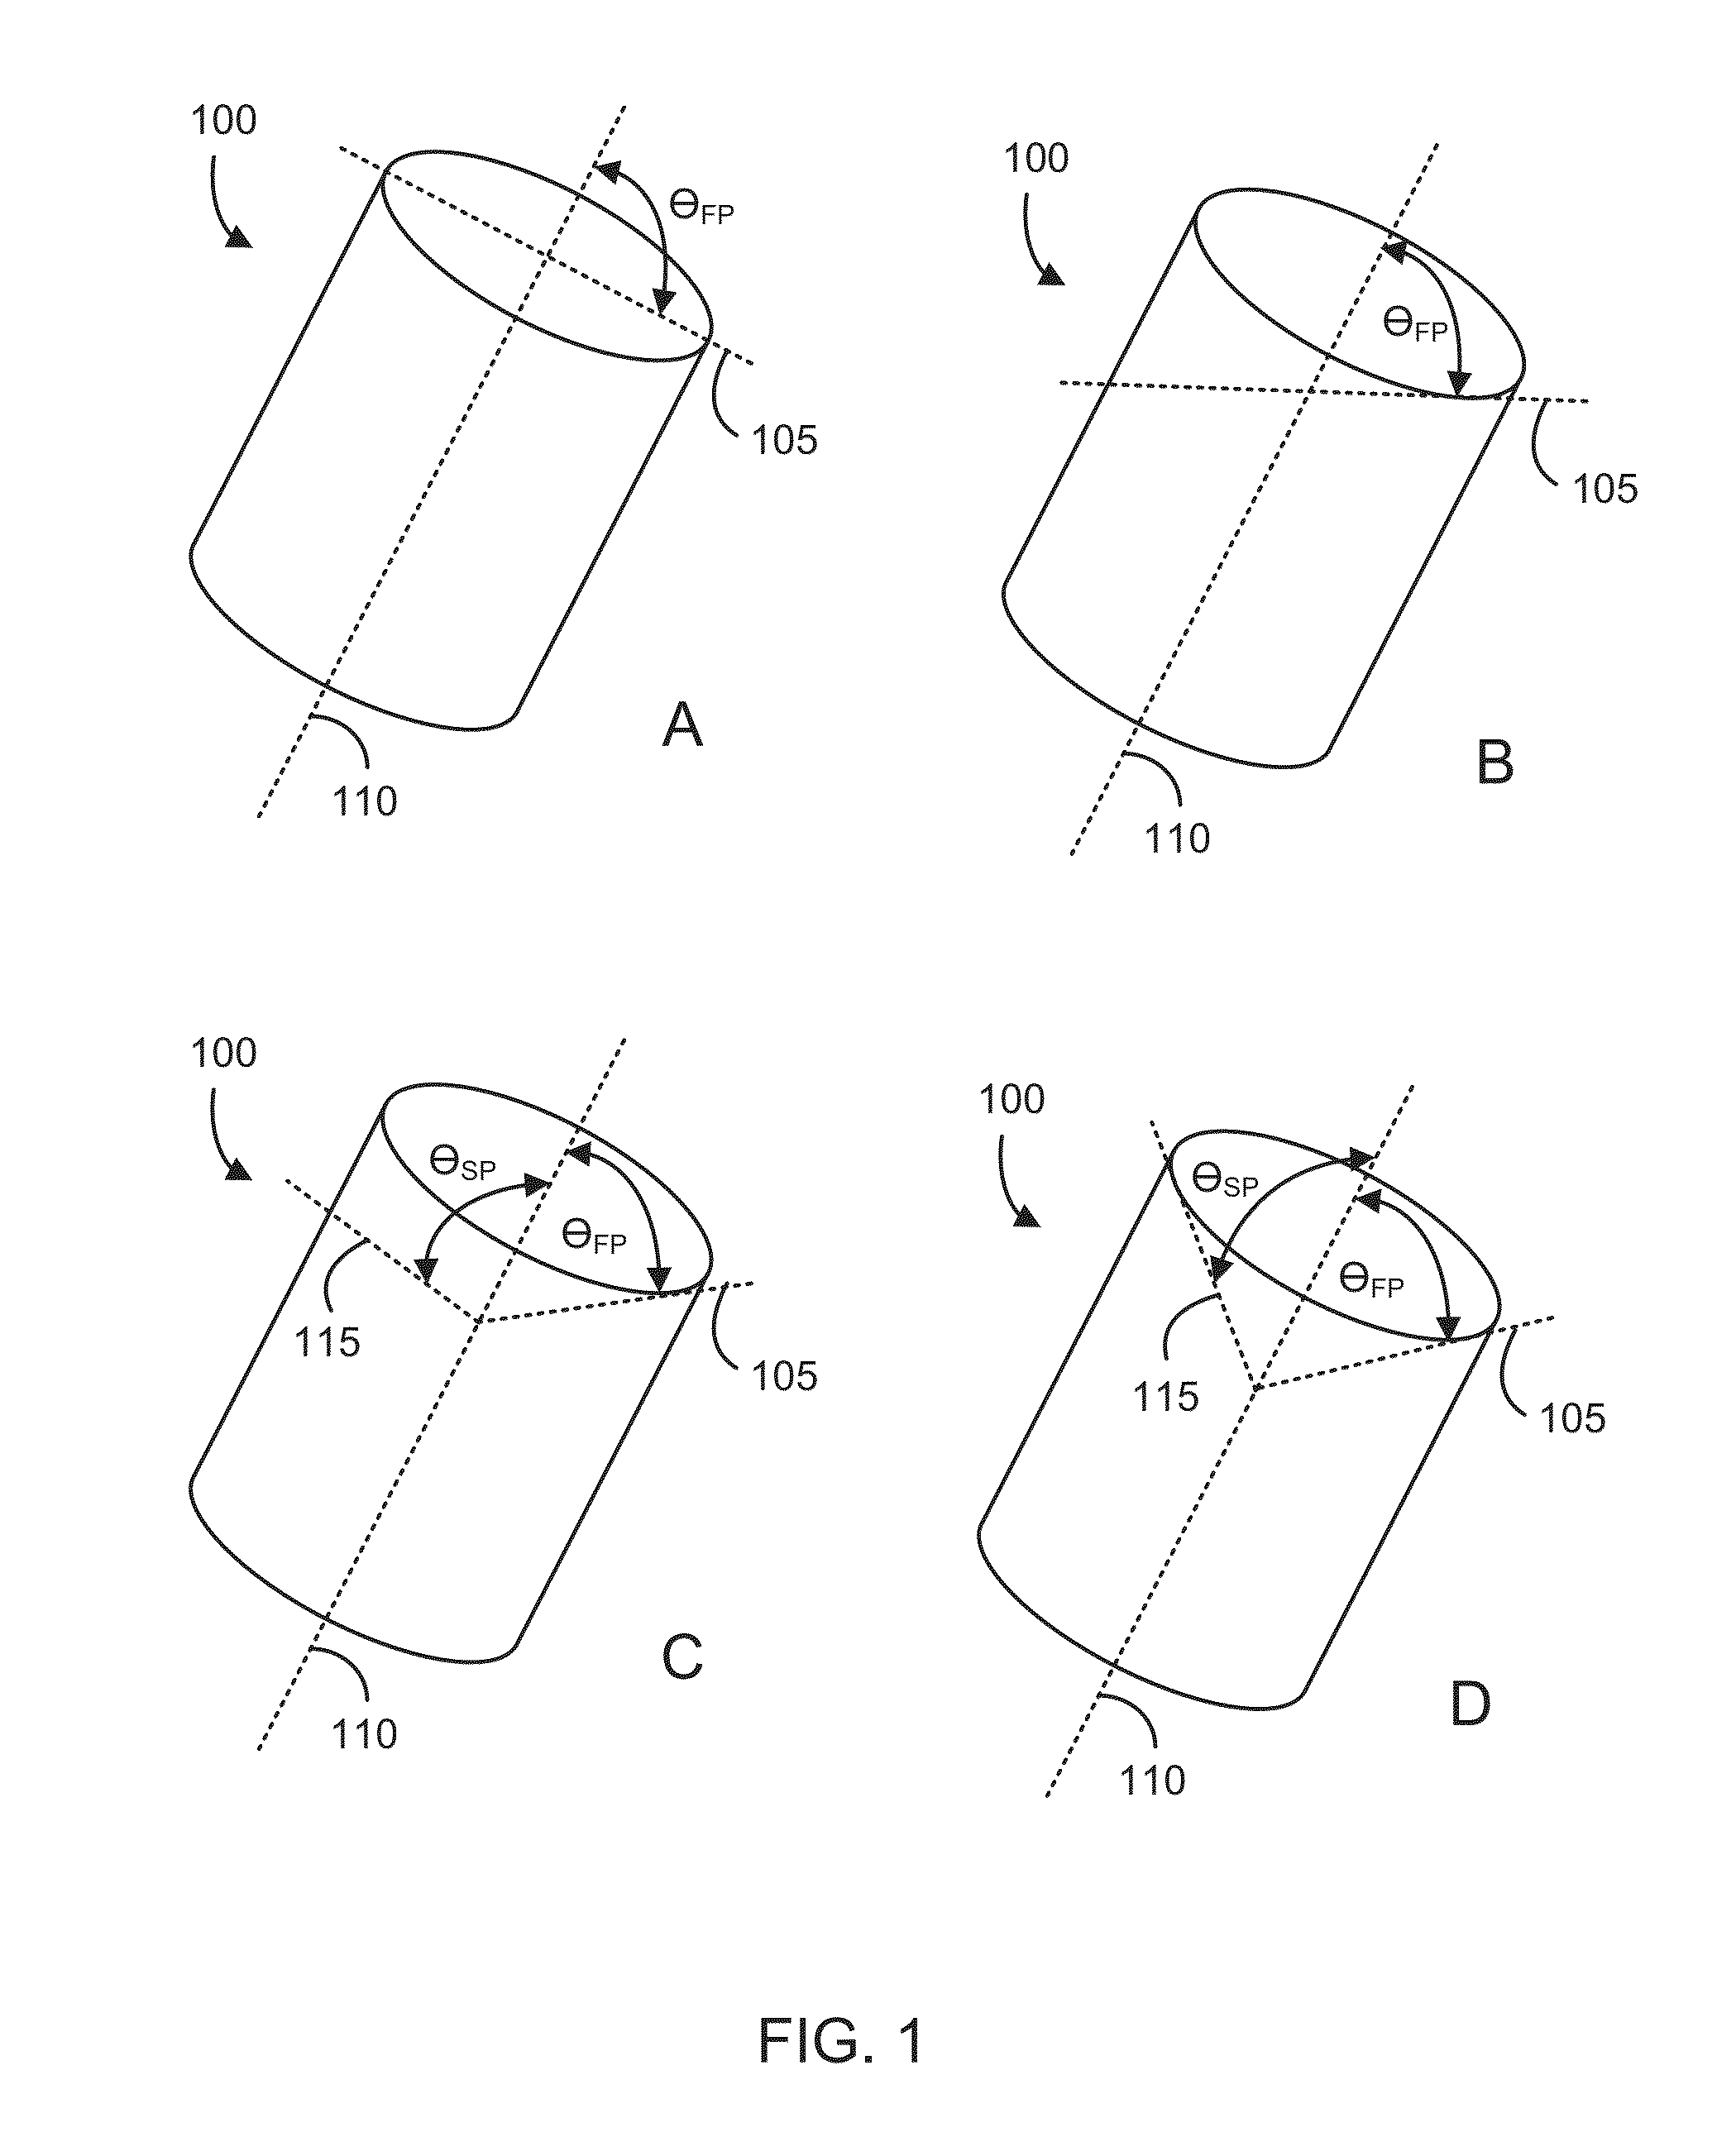 Anti-clogging device for a vacuum-assisted, tissue removal system